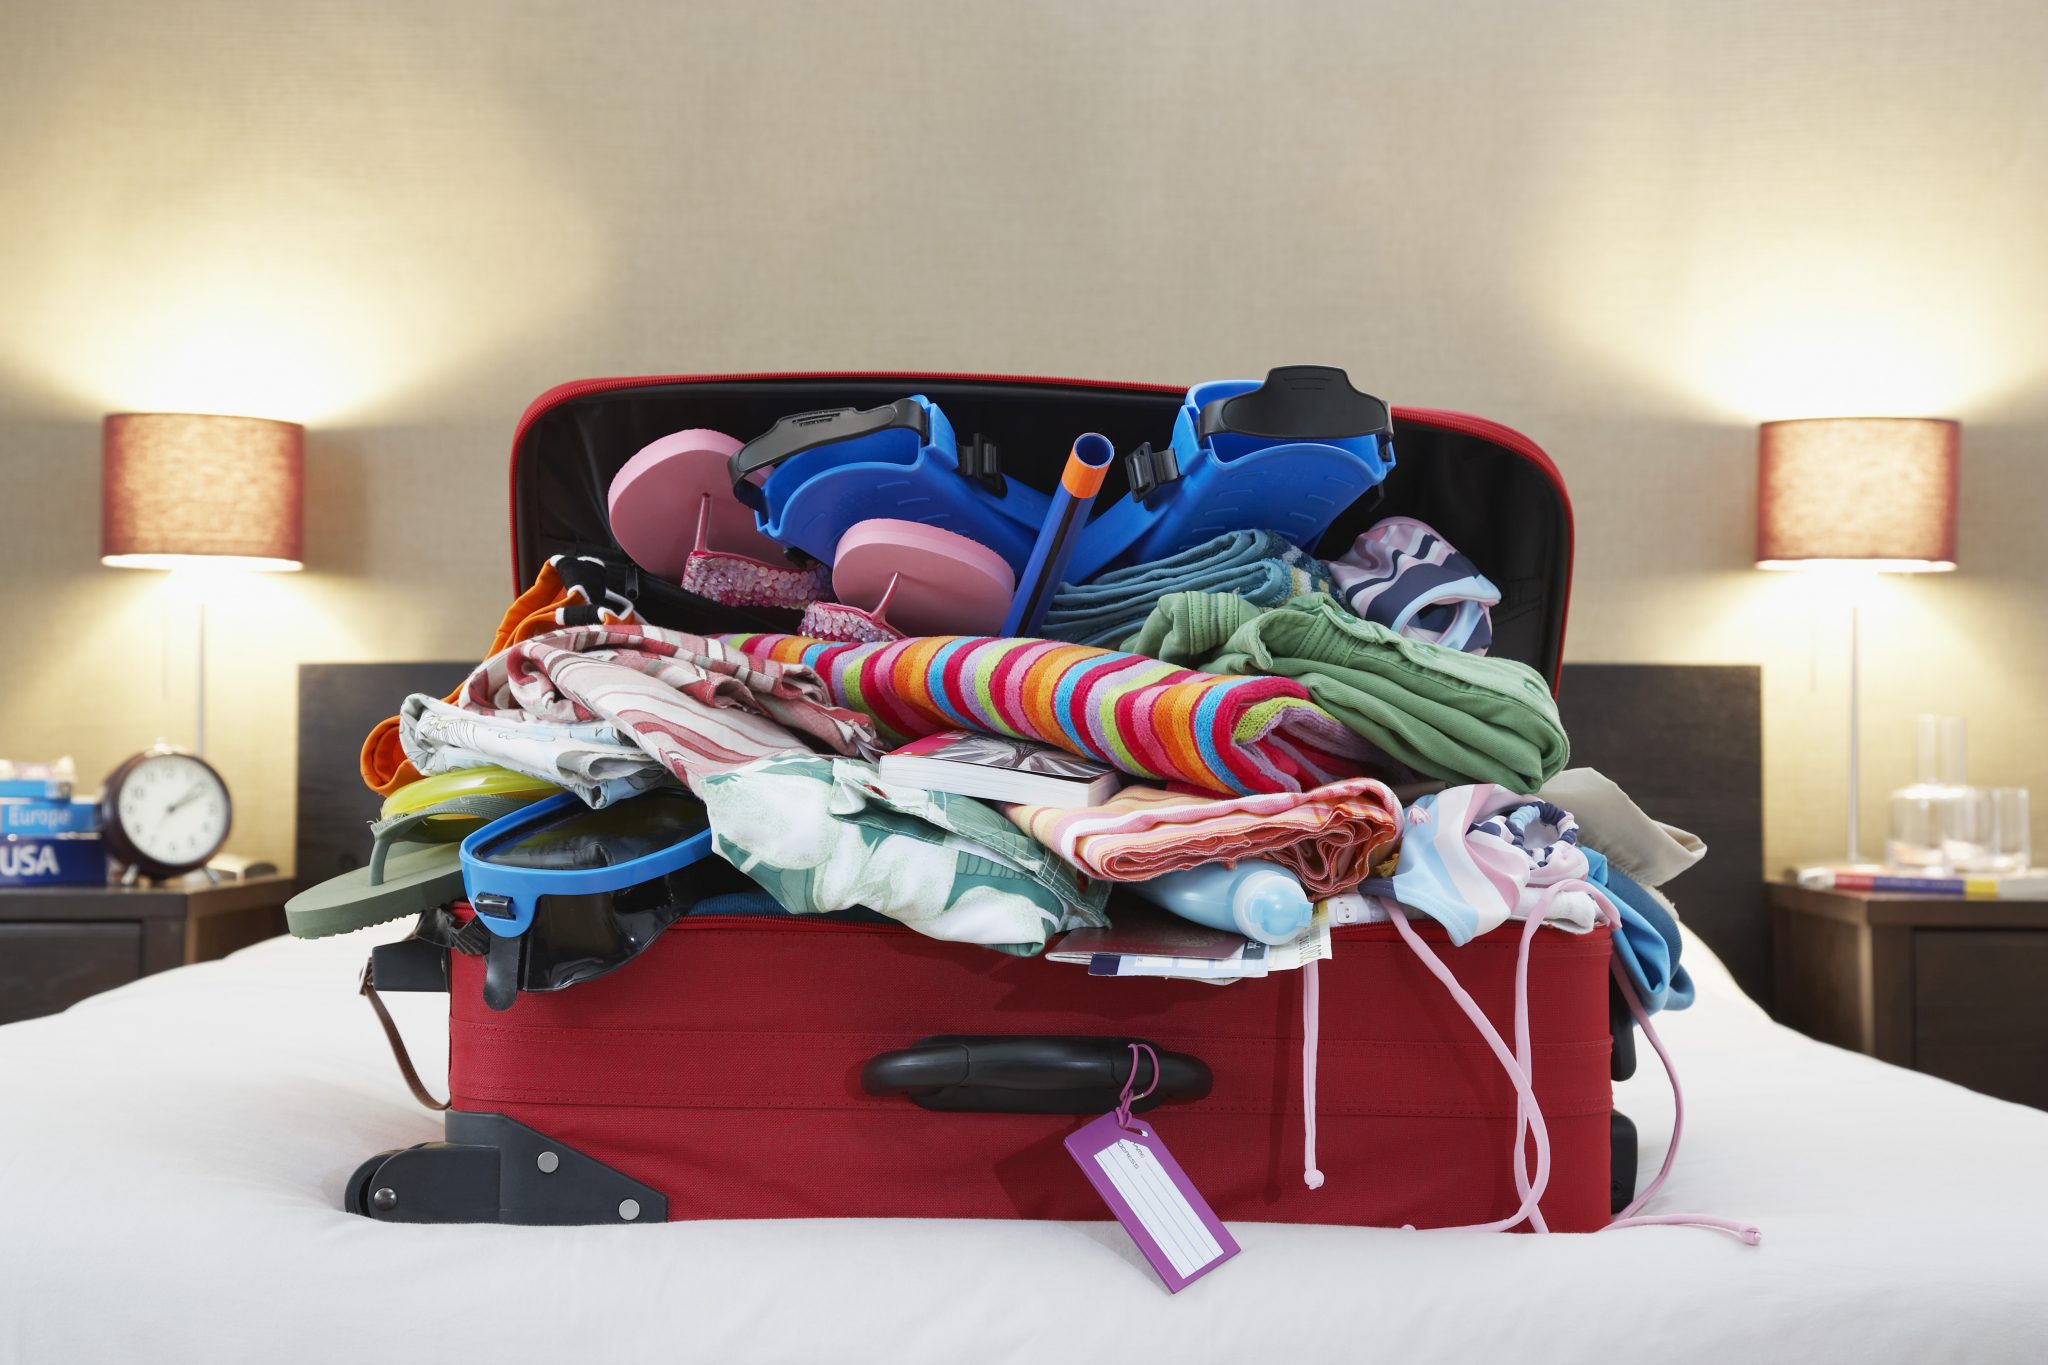 5 Road Trip Essentials To Pack